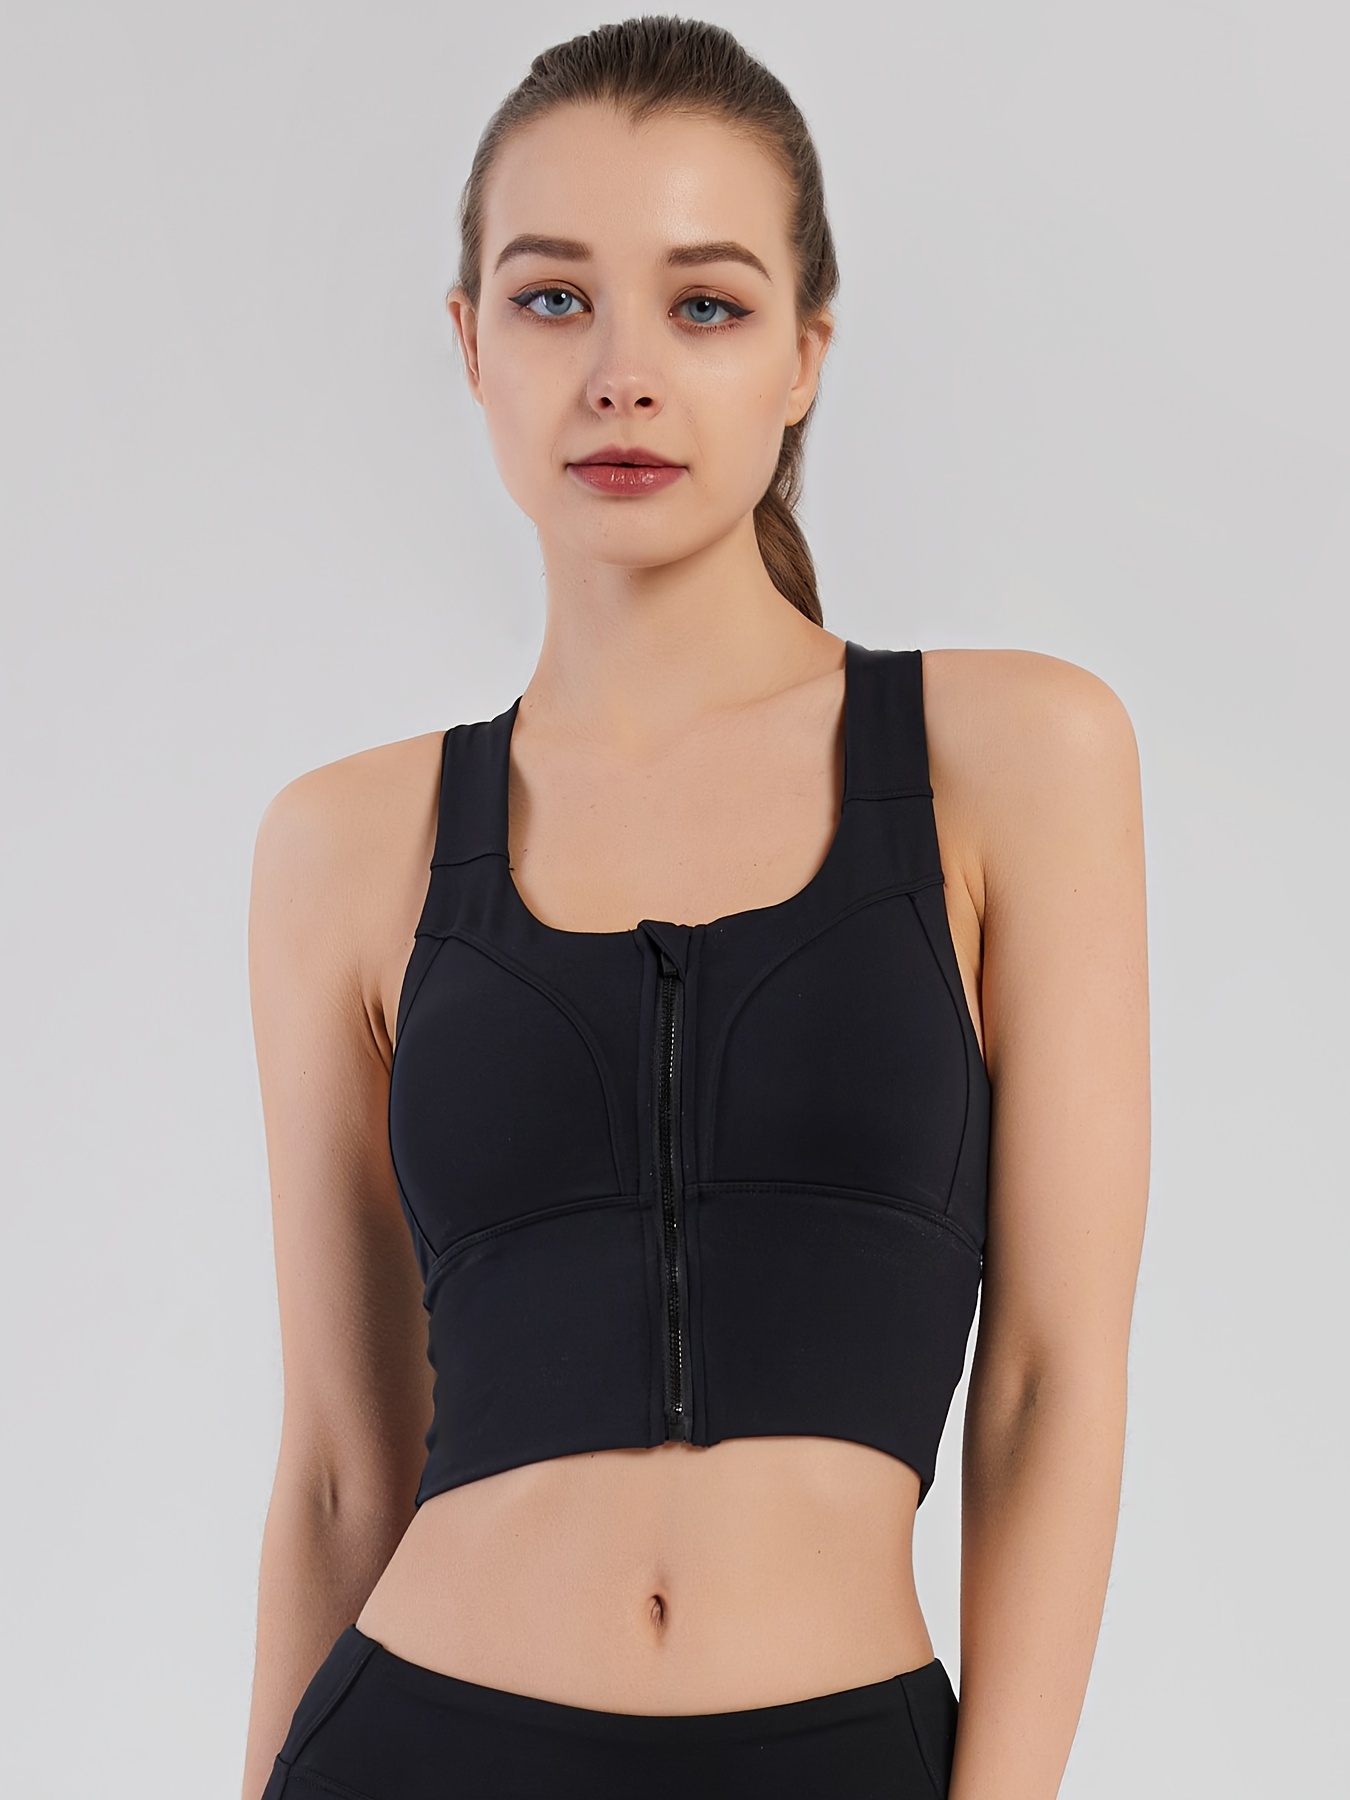 High Impact Color Block Sports Bra with Backless Design and Double Straps -  Perfect for Women's Activewear